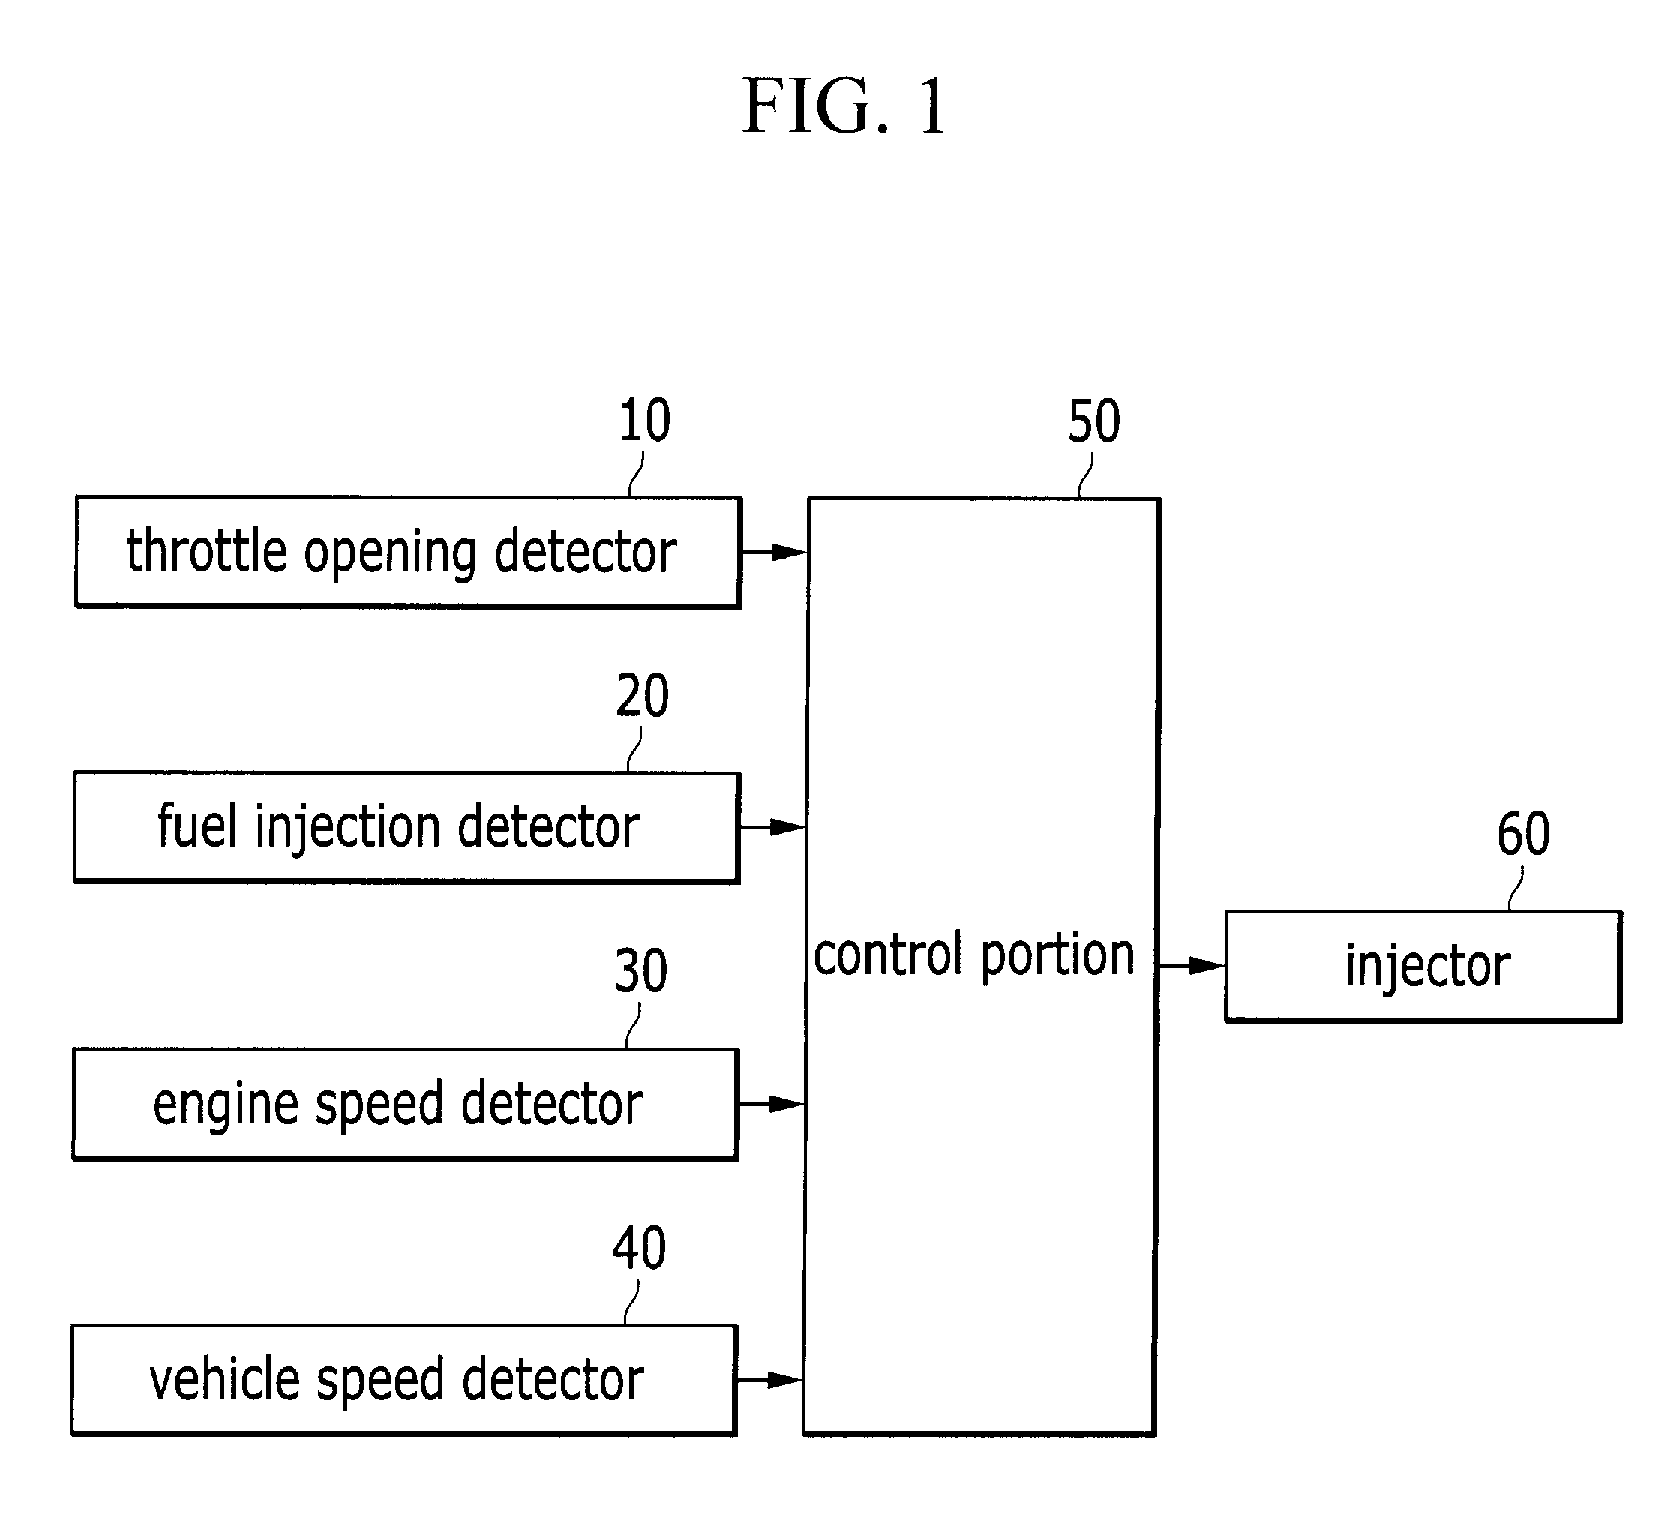 System and Method for Controlling the Number of Pilot Injections